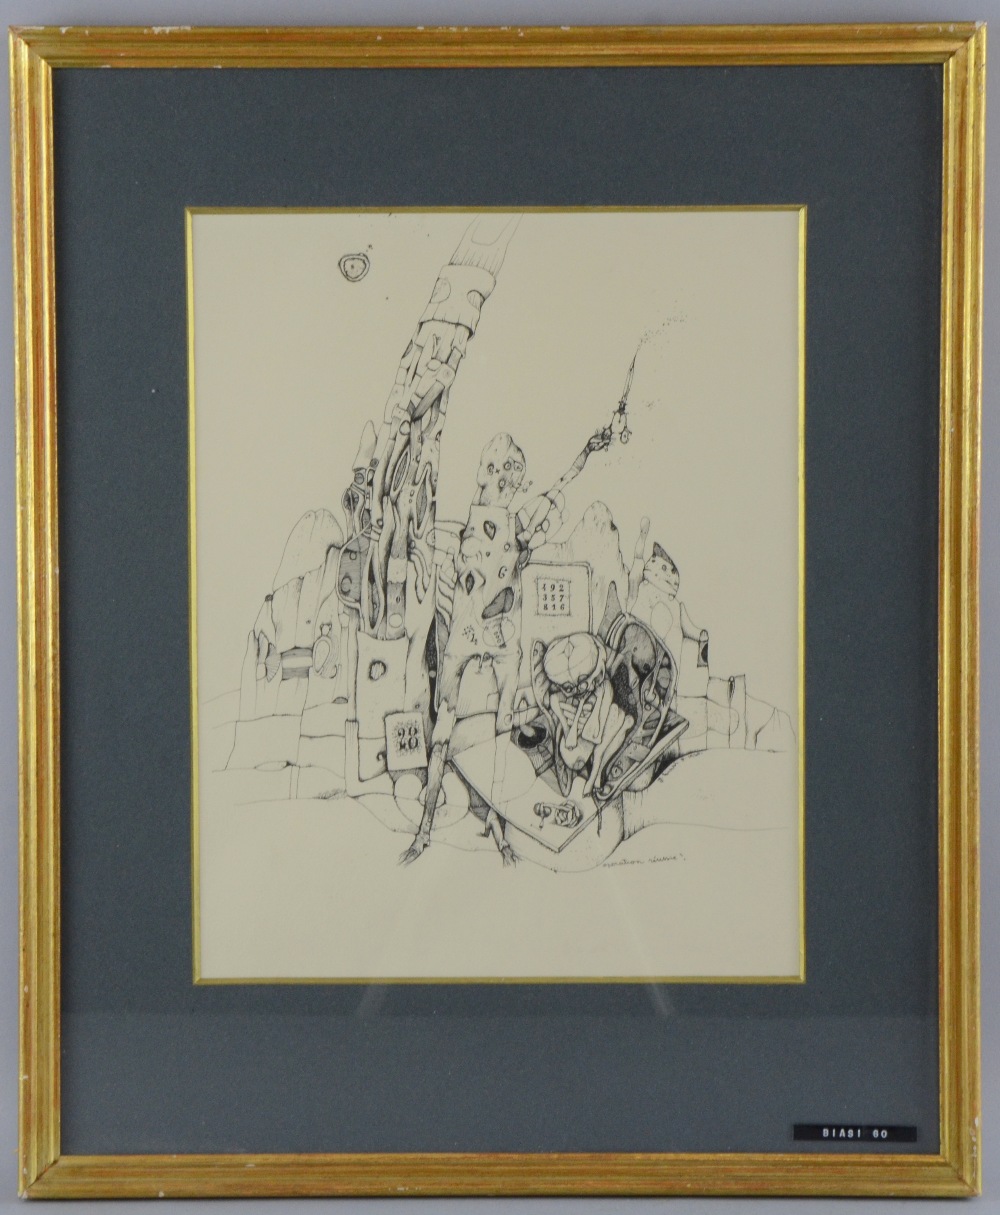 Guido Biasi, pen on paper,Operation Reussie, framed and glazed  12 x 9in. (30 x 23cm) - Image 2 of 2